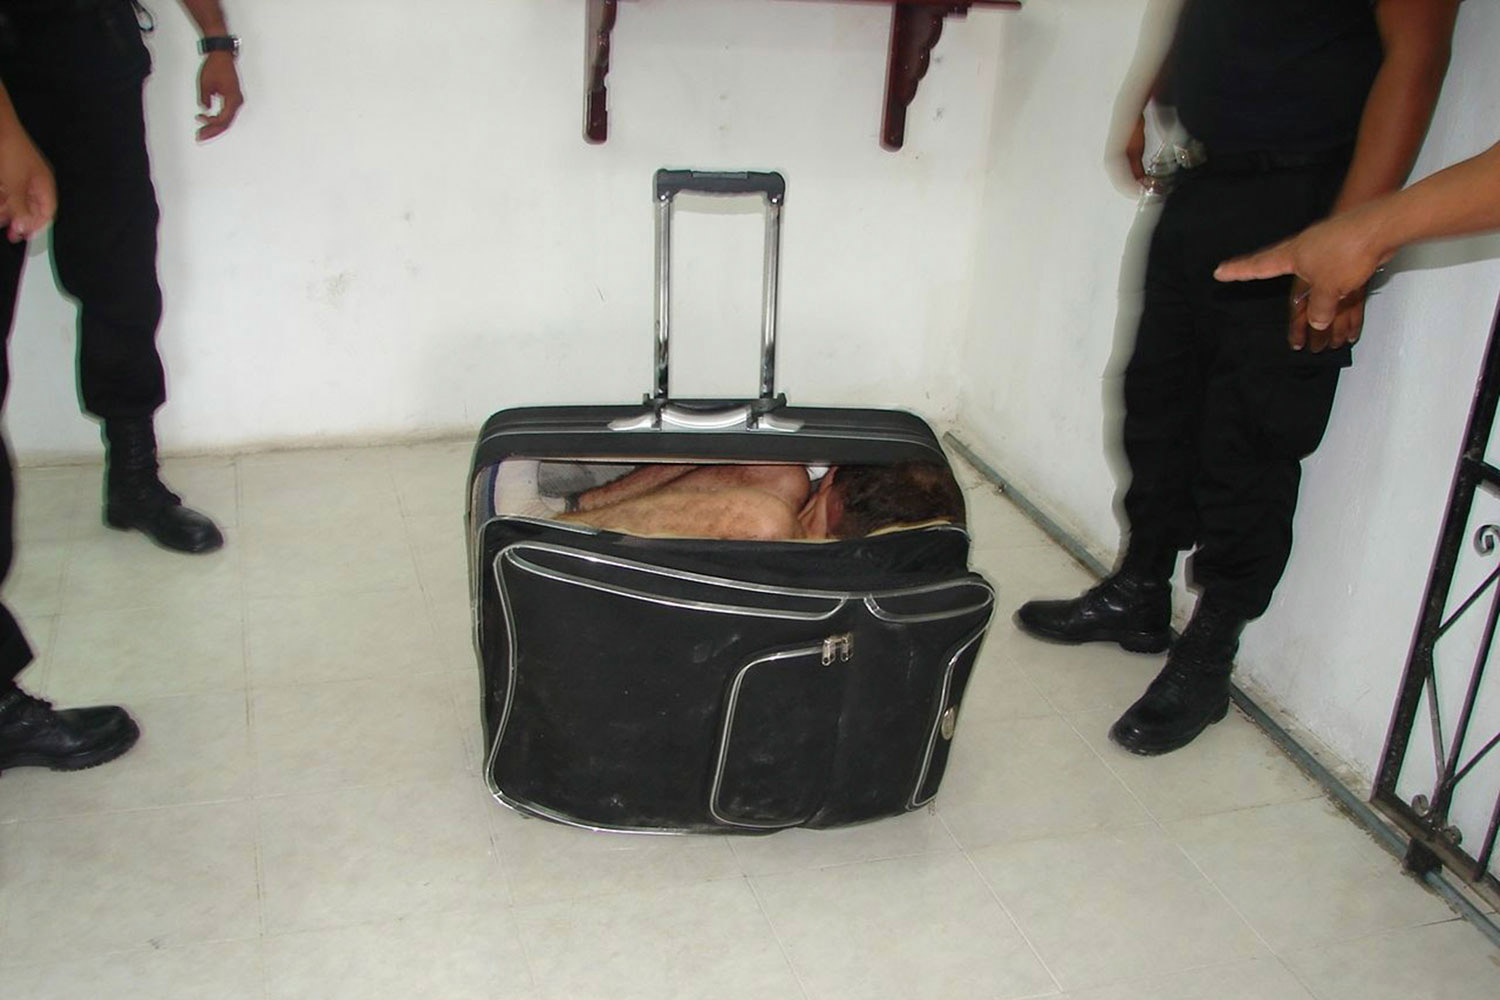 July 2, 2011. Prison guards stand around inmate Juan Ramirez Tijerina as he hides in a suitcase during an escape attempt from a prison in Chetumal. Tijerina tried to escape from prison by hiding inside the suitcase after a conjugal visit.